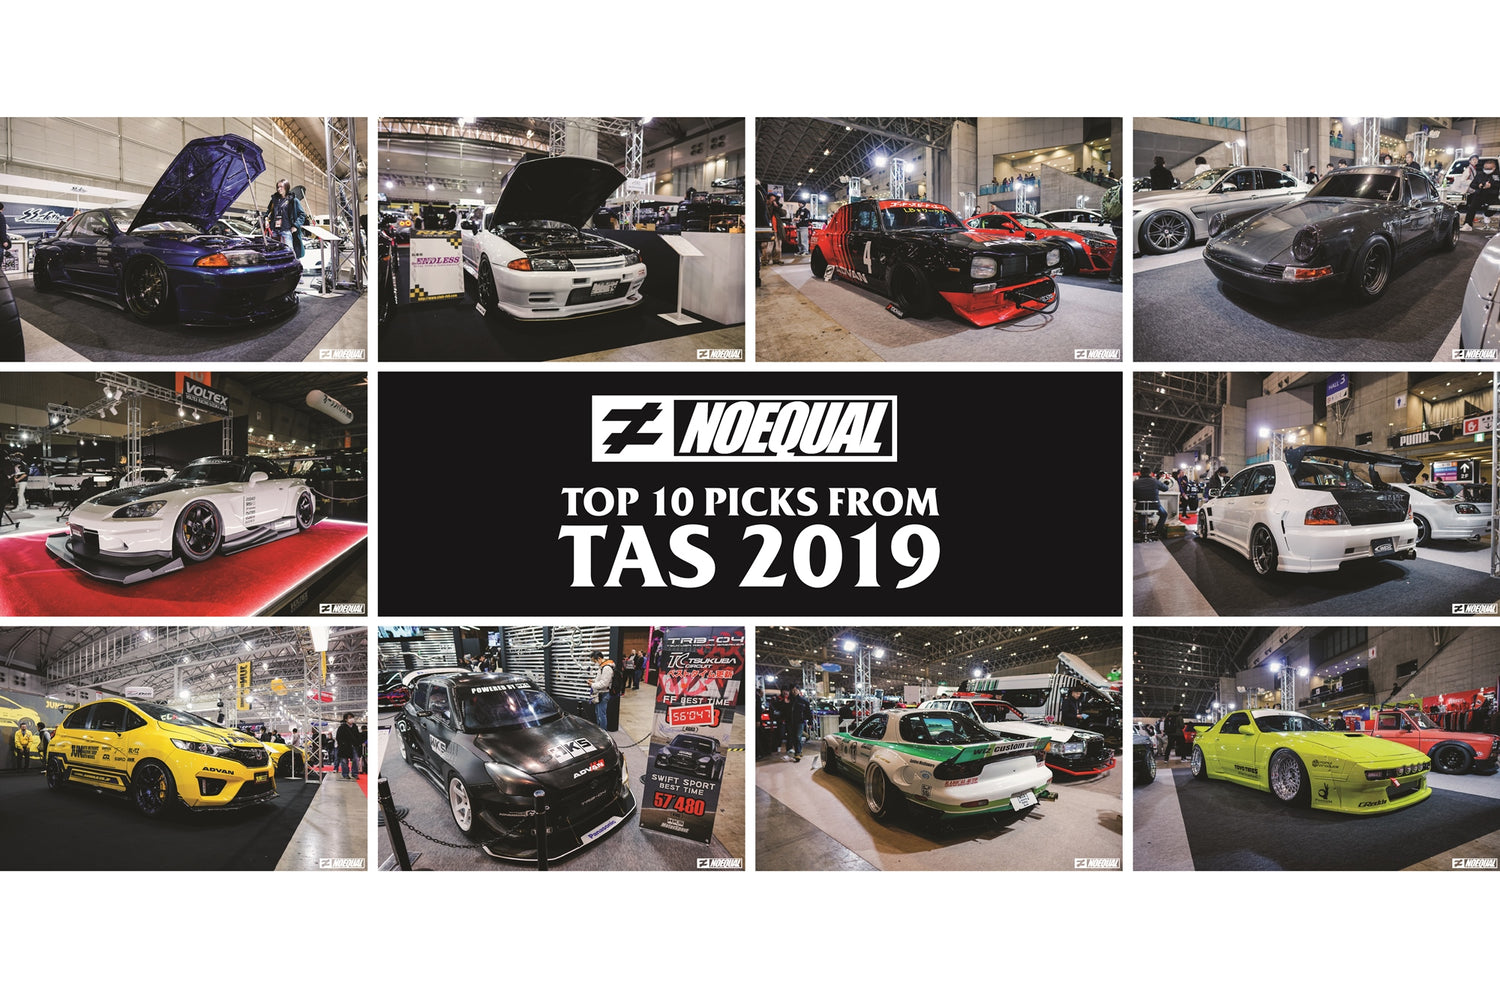 Our Top 10 Picks from TAS 2019